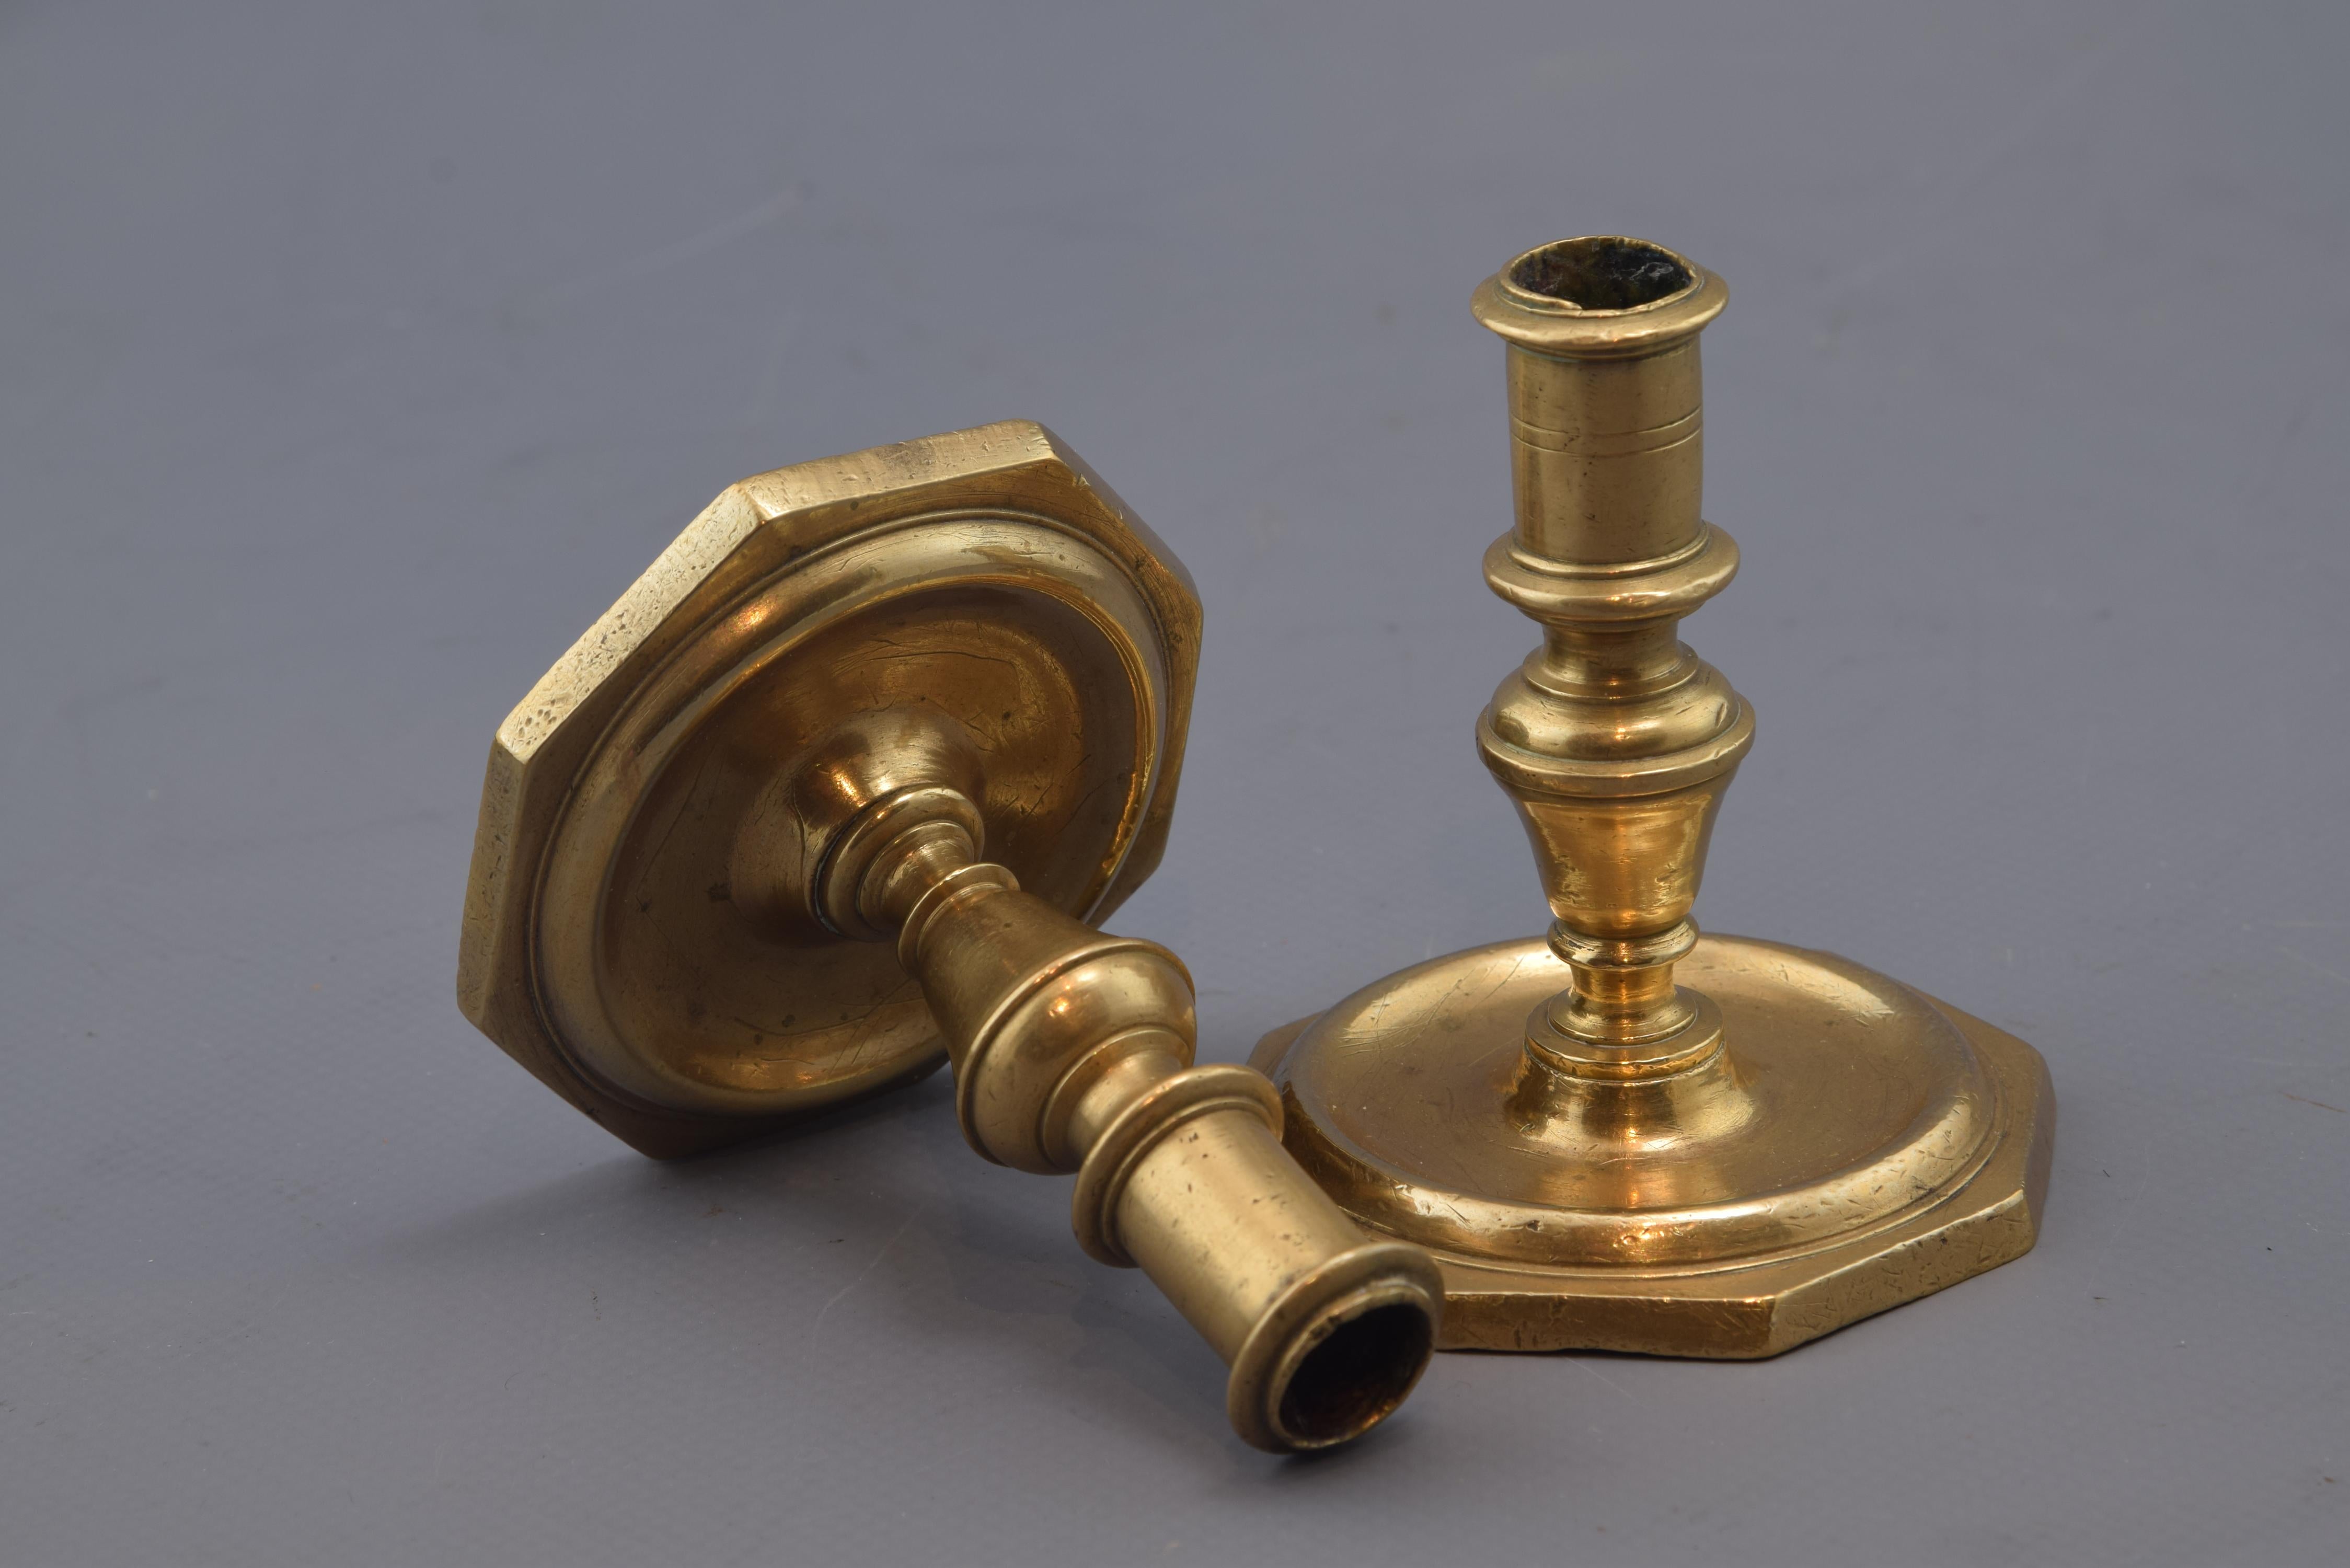 Neoclassical Pair of Candleholders, Bronze, 18th Century